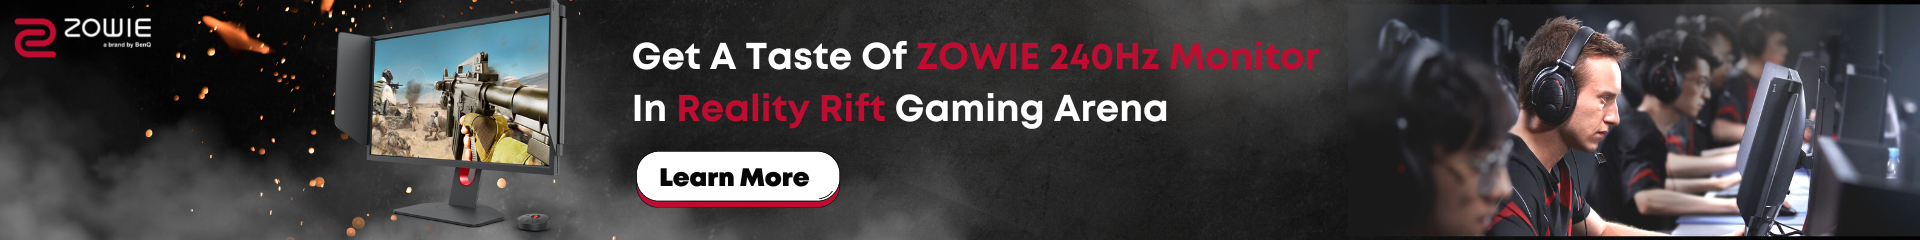 zowie experience event 